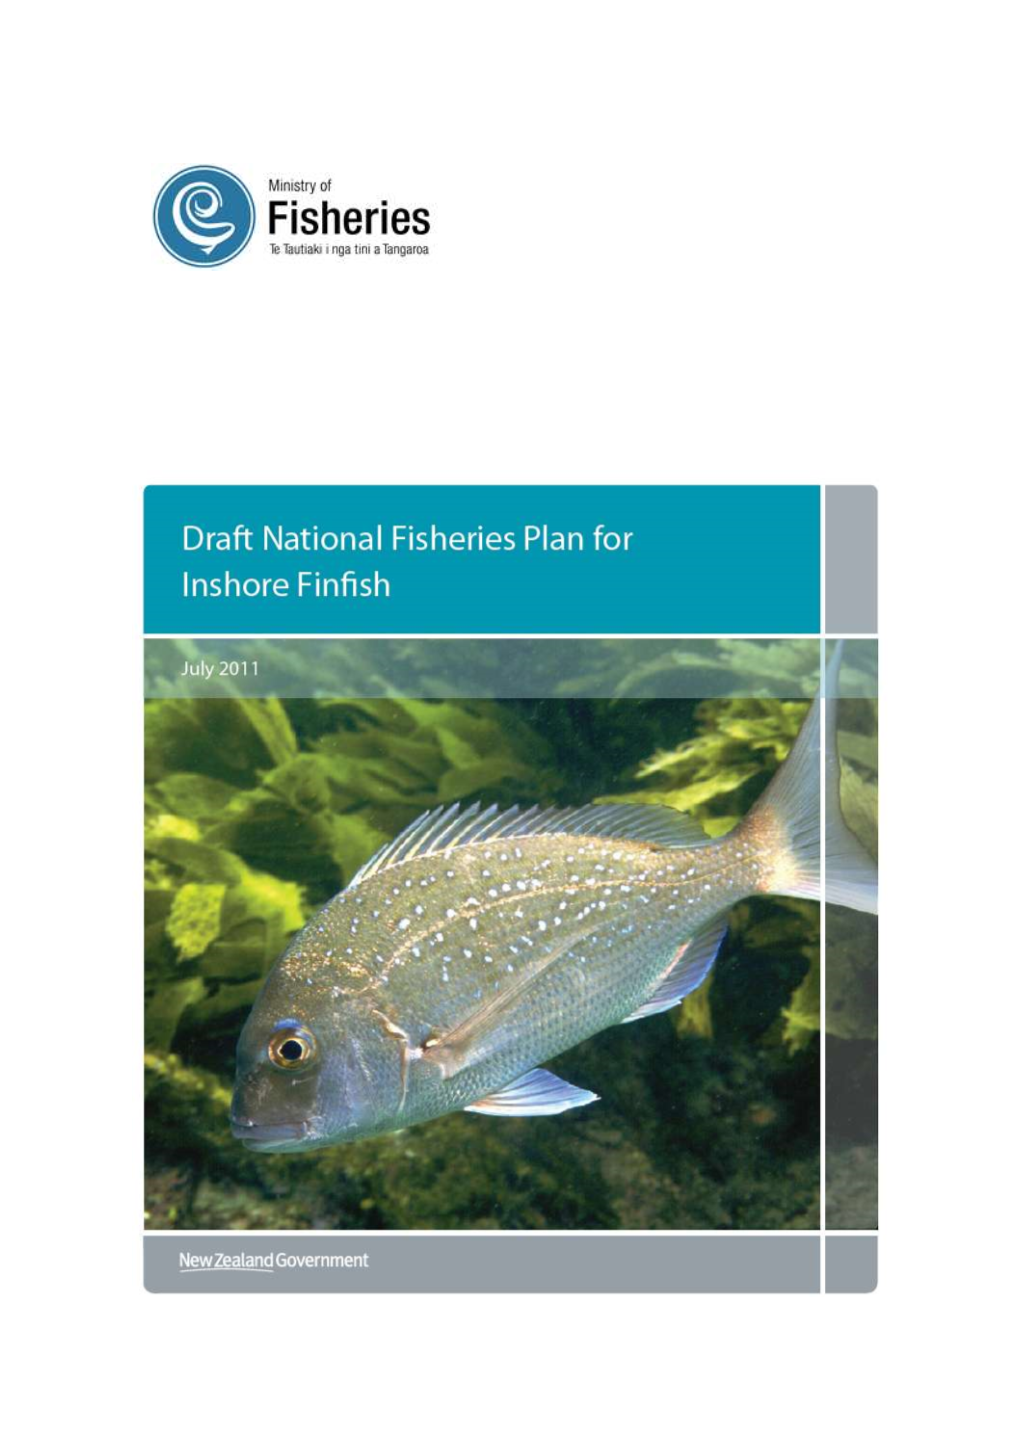 Draft National Fisheries Plan for Inshore Finfish Fisheries to Guide This Work